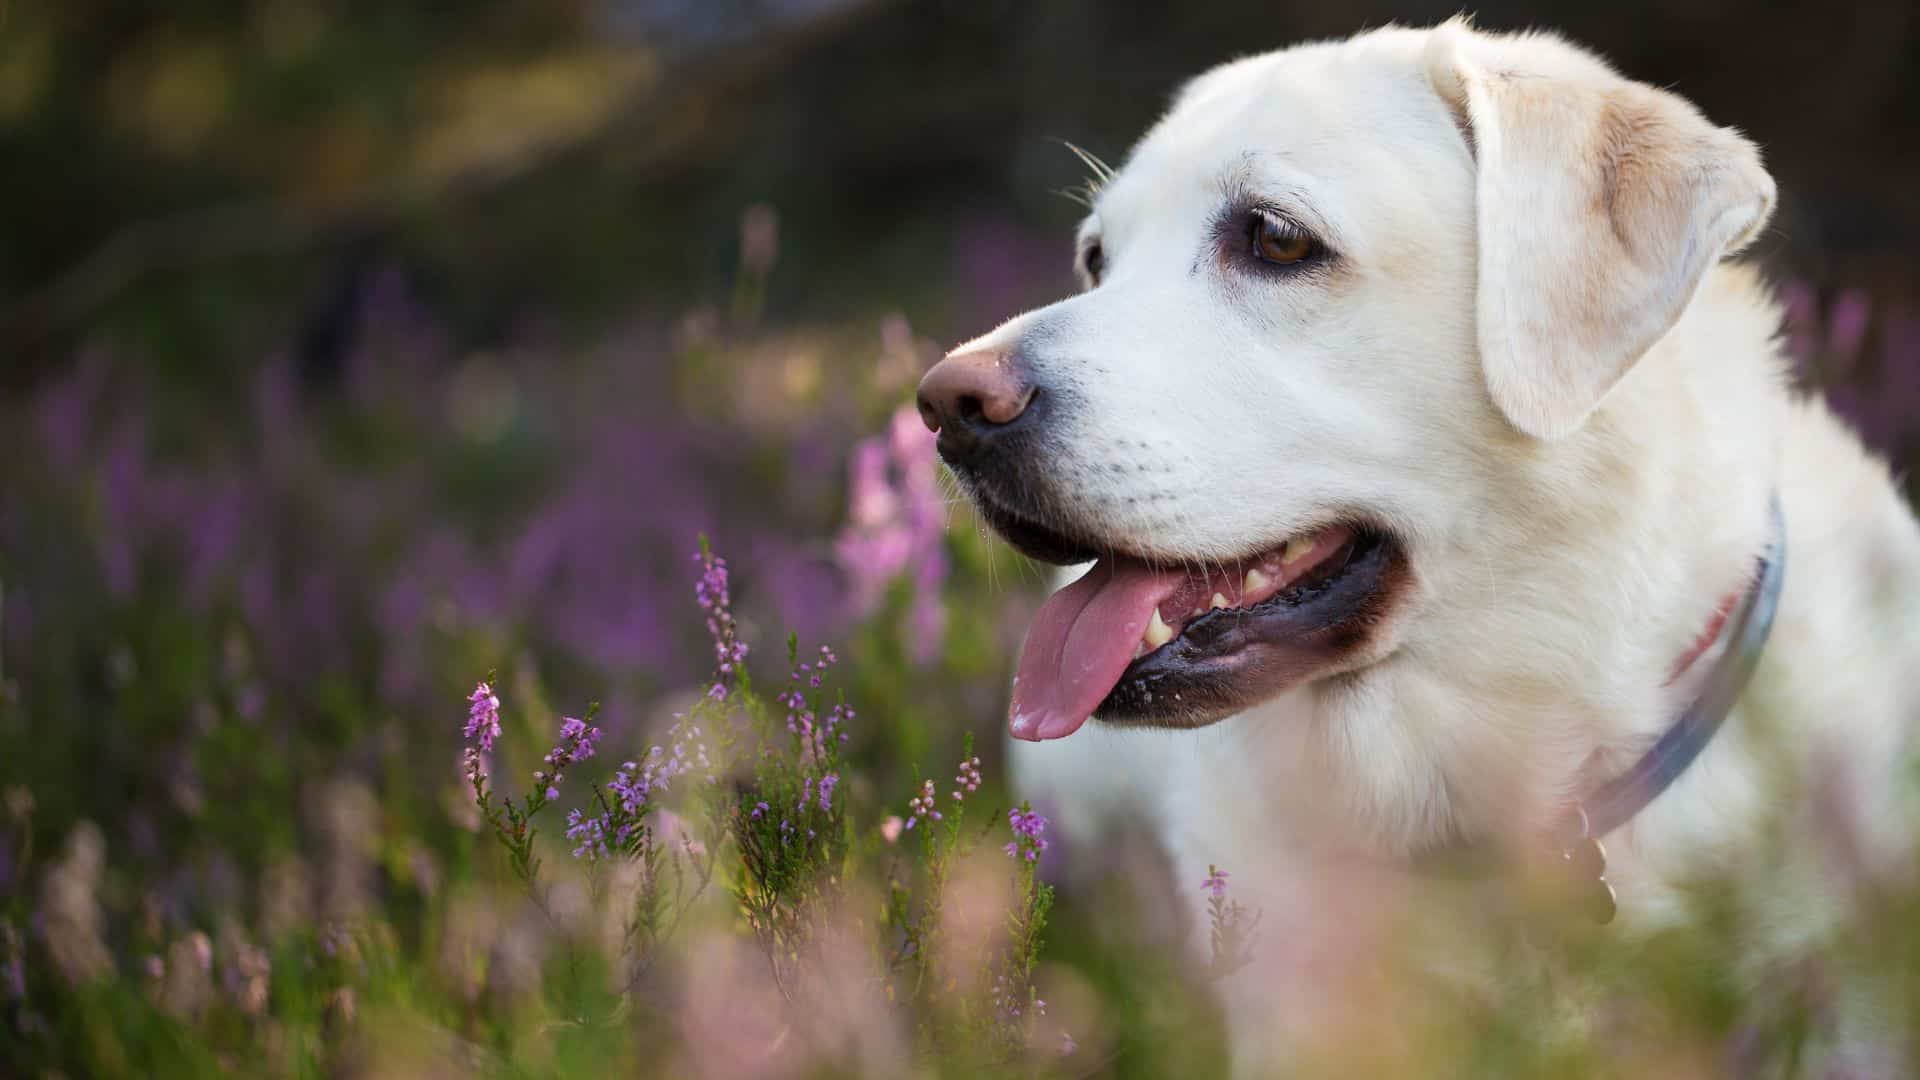 7 Dog Breeds With Sensitive Souls That Are Angels On Earth